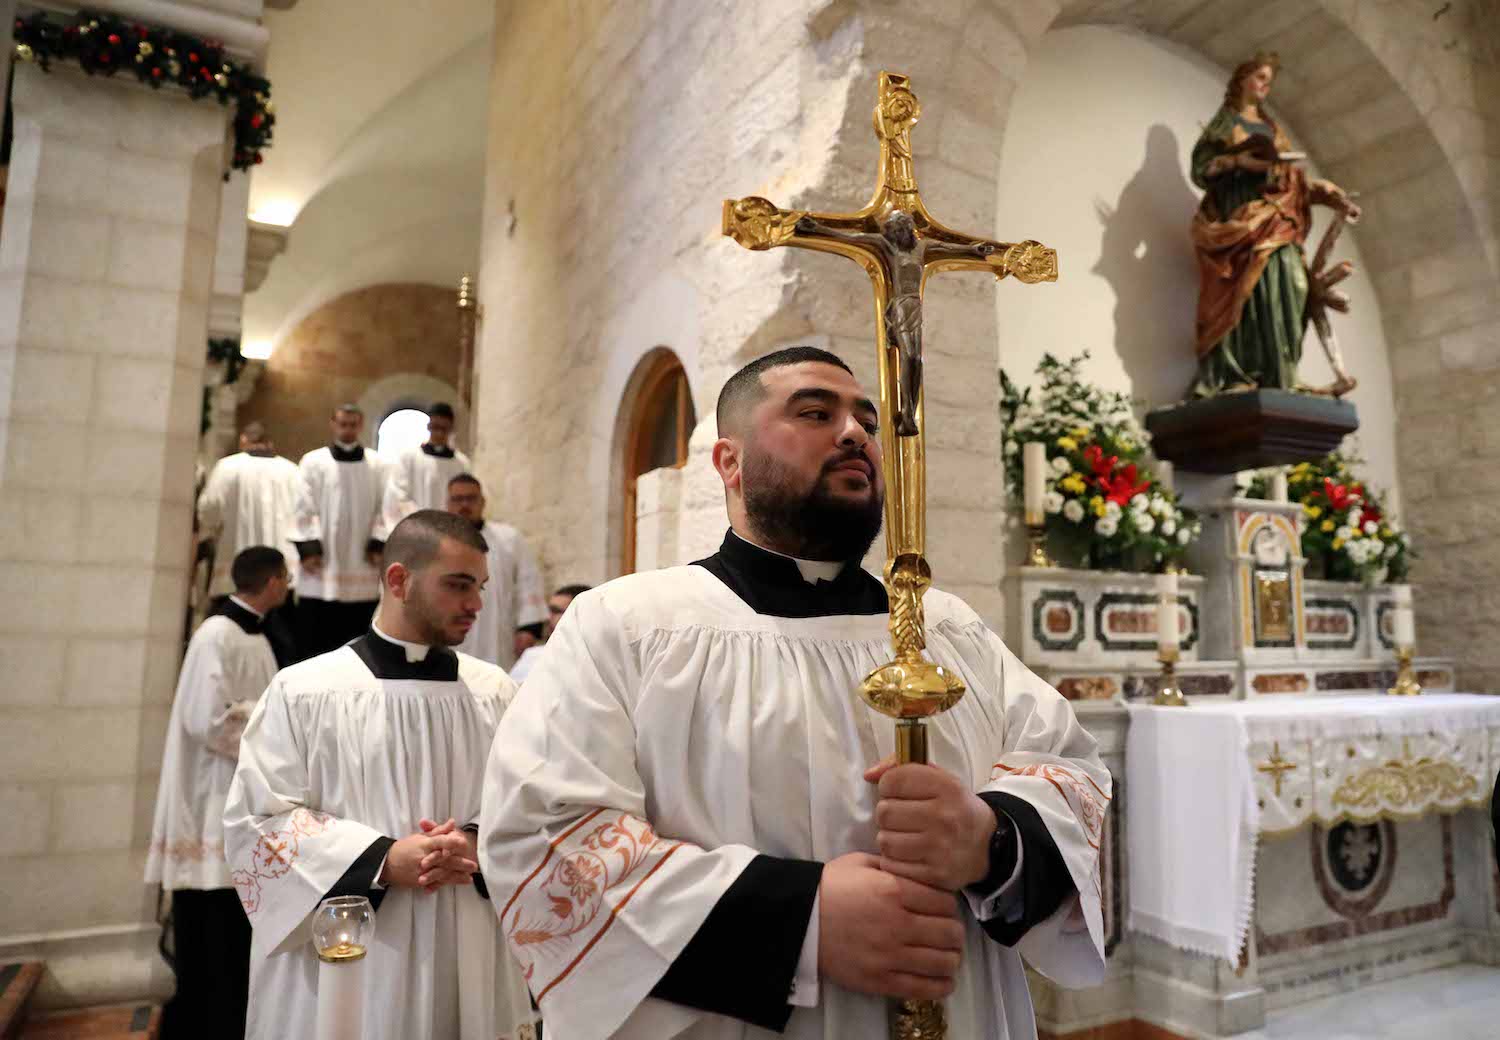 Latin Patriarch Pierbattista Pizzaballa, the top Catholic clergyman in the Holy Land (center) leads the Christmas morning Mass at the Church of the Nativity, Bethlehem, West Bank, December 25, 2021. (Wisam Hashlamoun/Flash90)